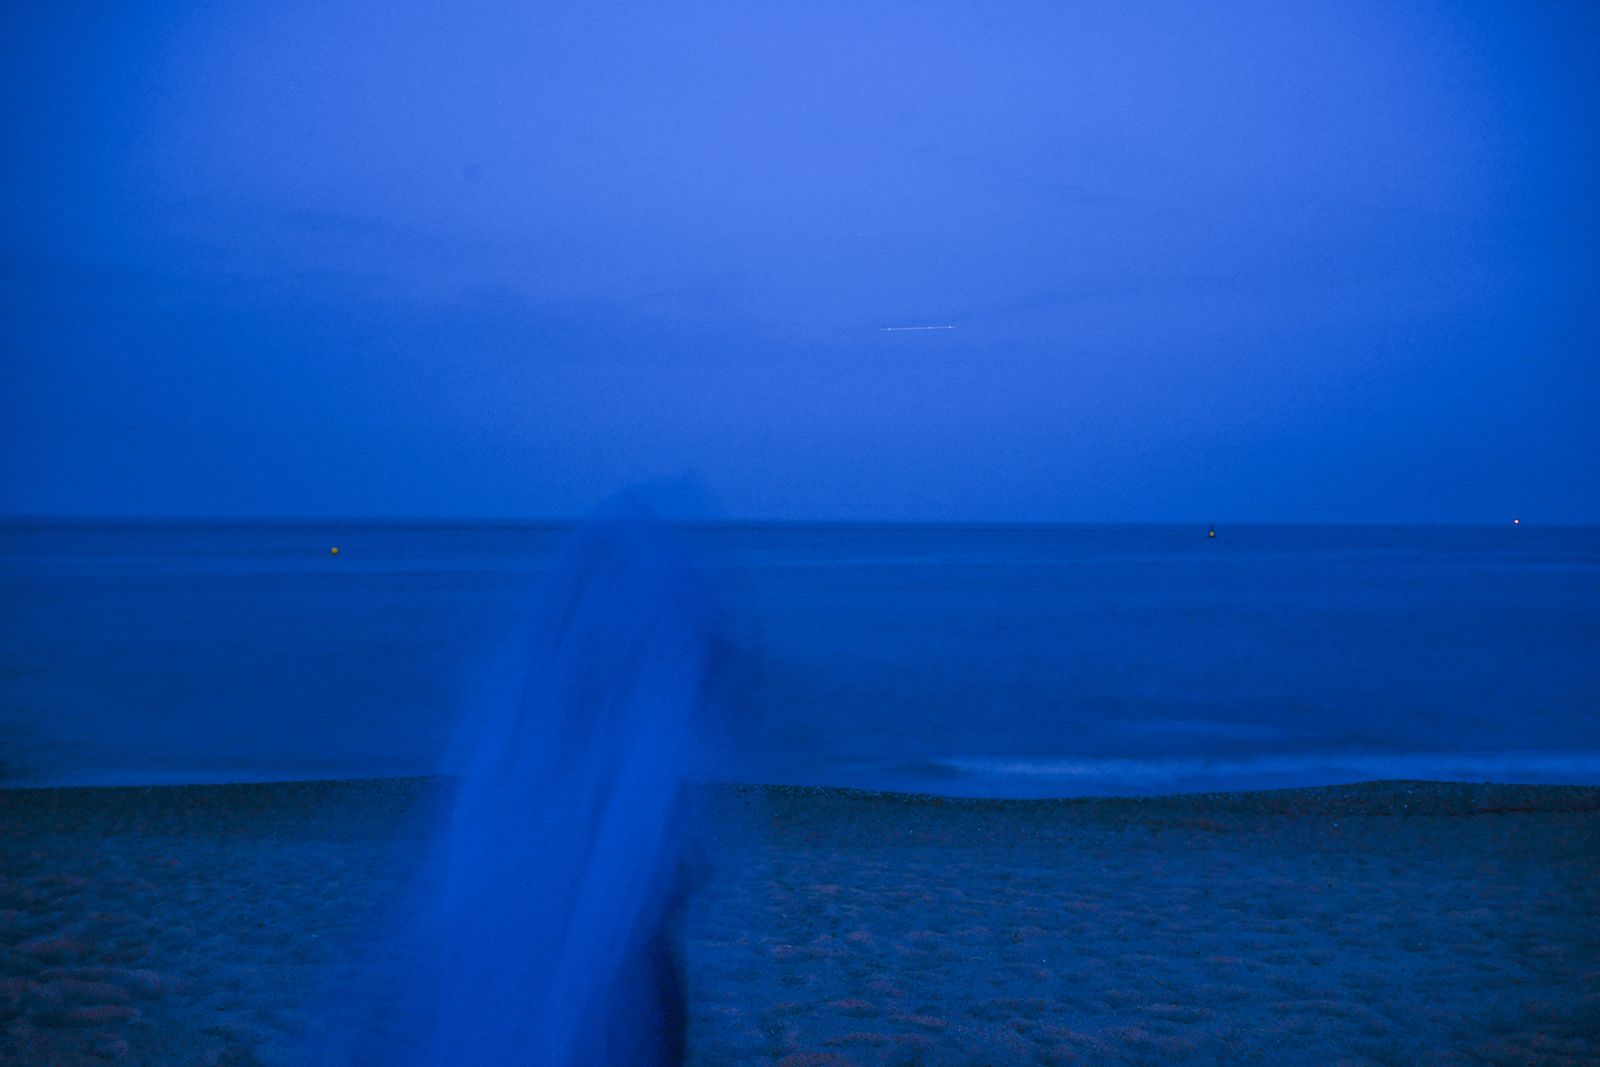 © Ting Miao - Image from the Into the blue photography project